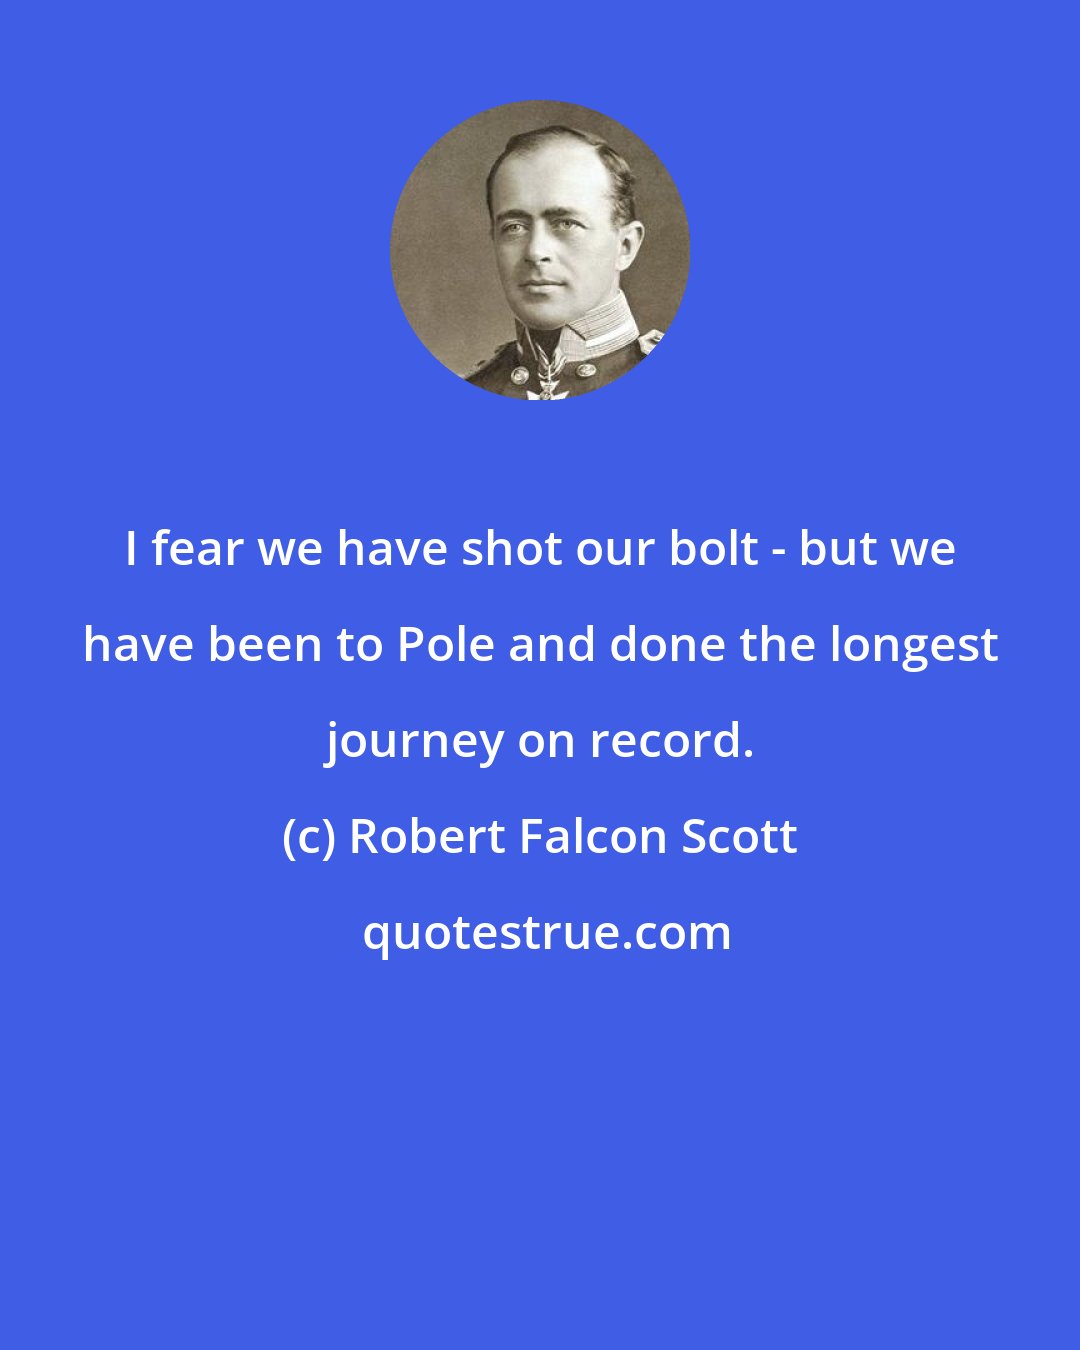 Robert Falcon Scott: I fear we have shot our bolt - but we have been to Pole and done the longest journey on record.